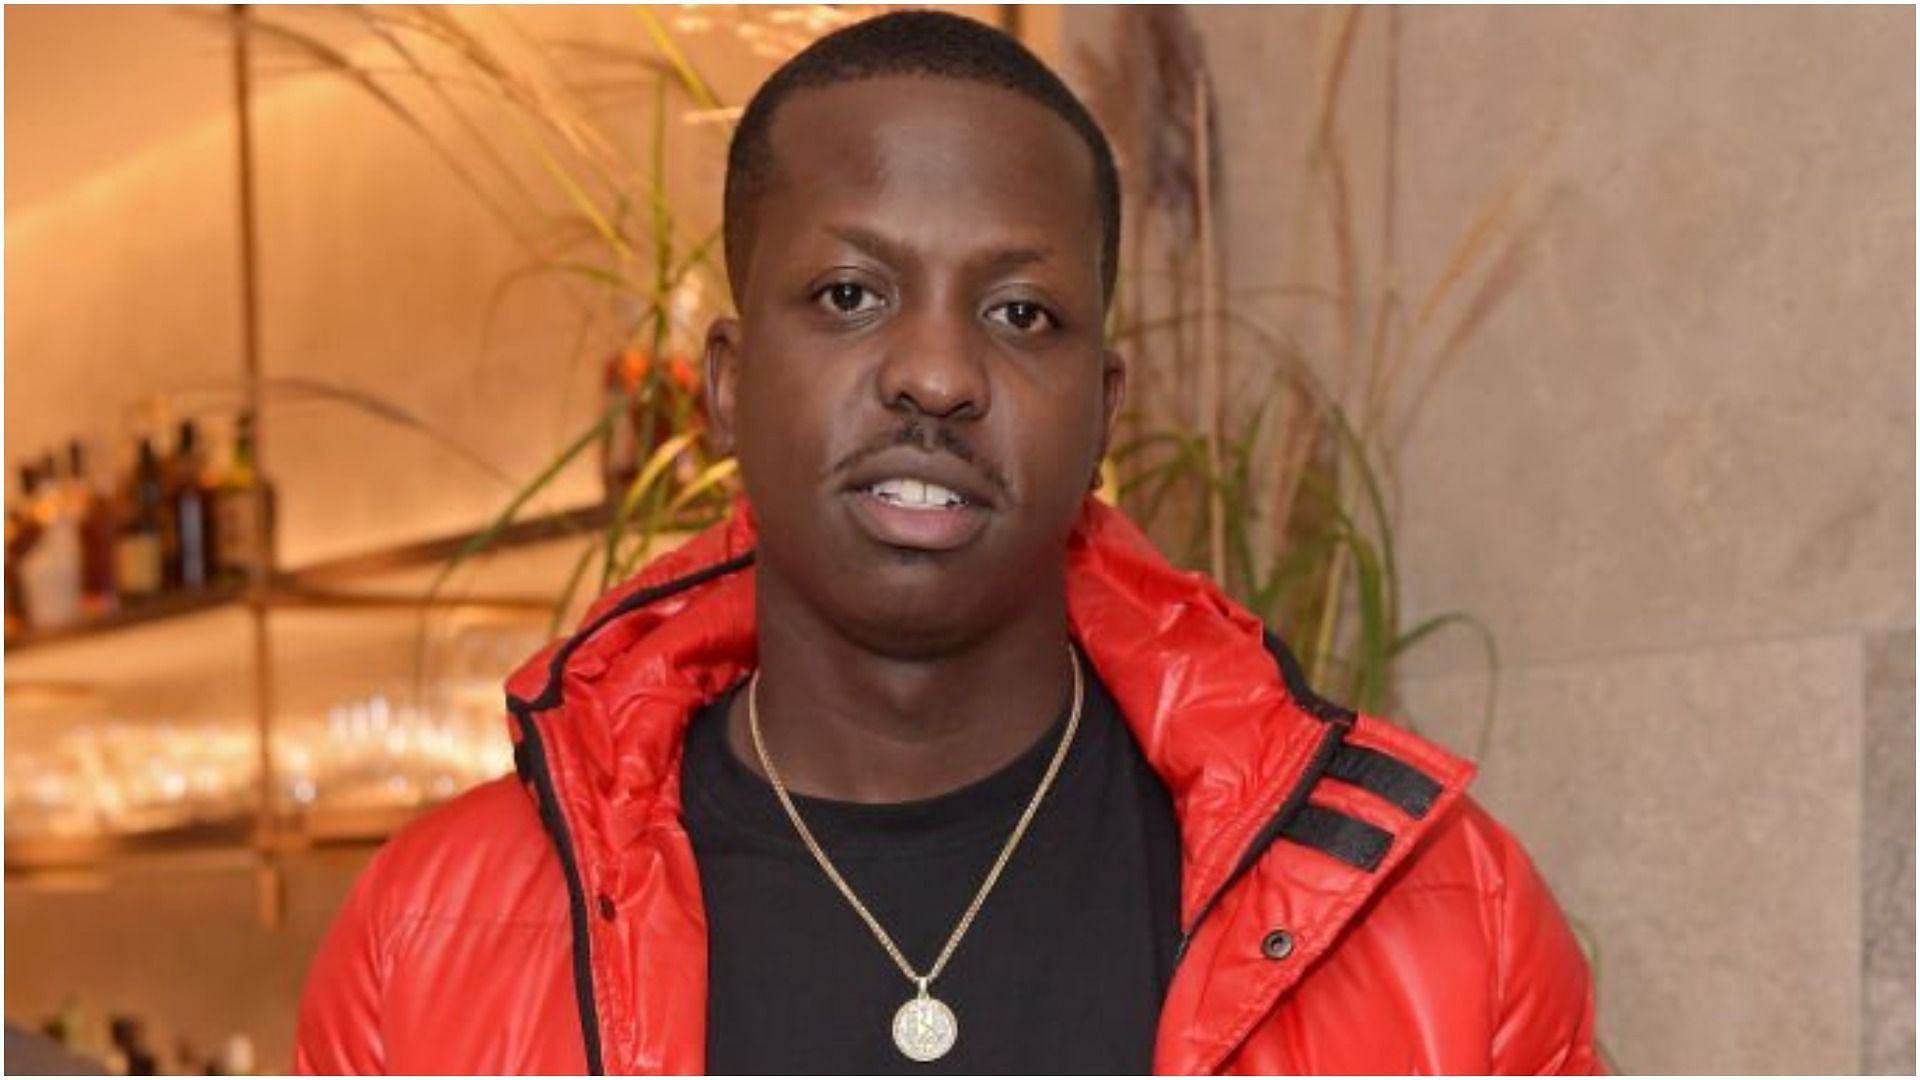 Jamal Edwards was mostly popular as the founder of SBTV (Image via David M. Benett/Getty Images)